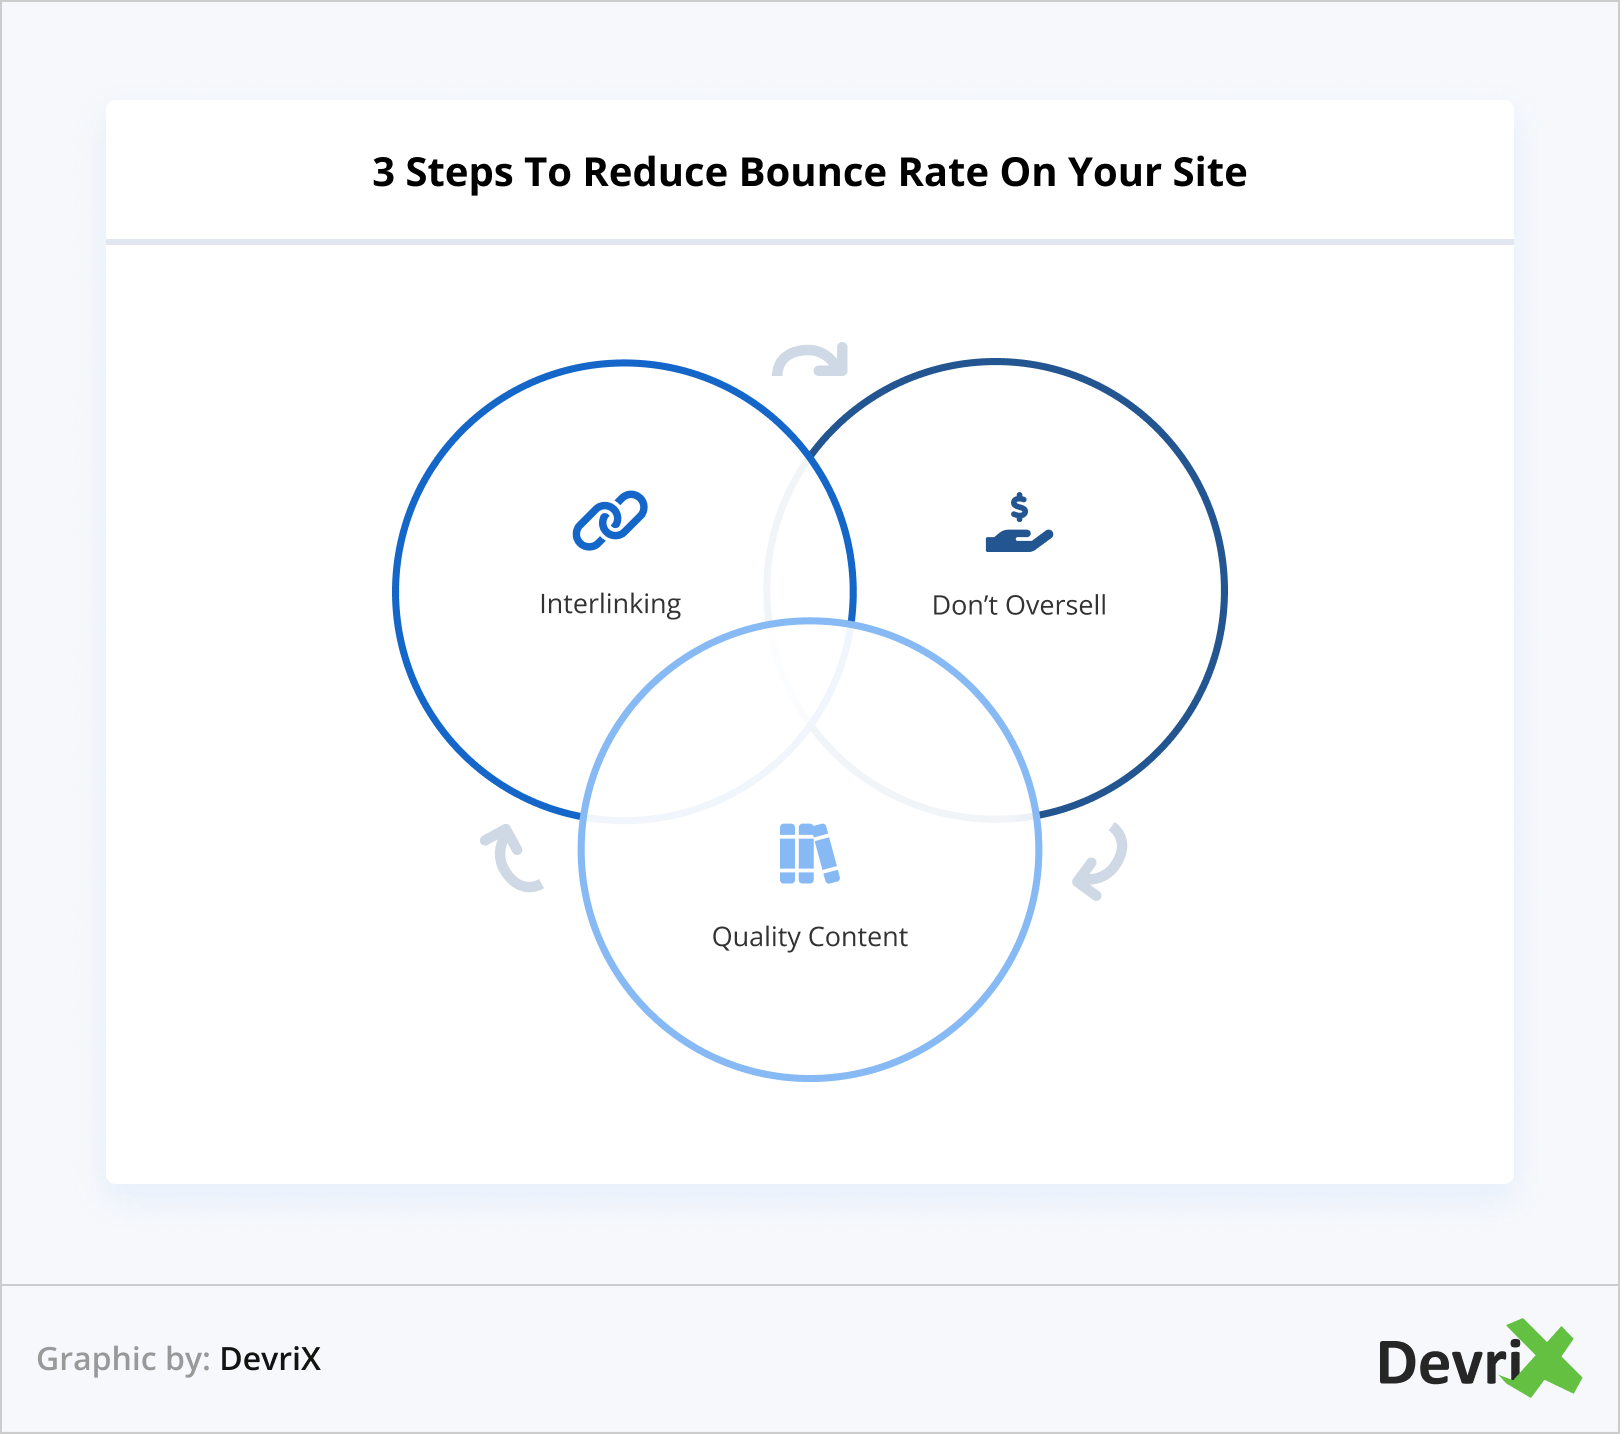 3 Steps To Reduce Bounce Rate On Your Site